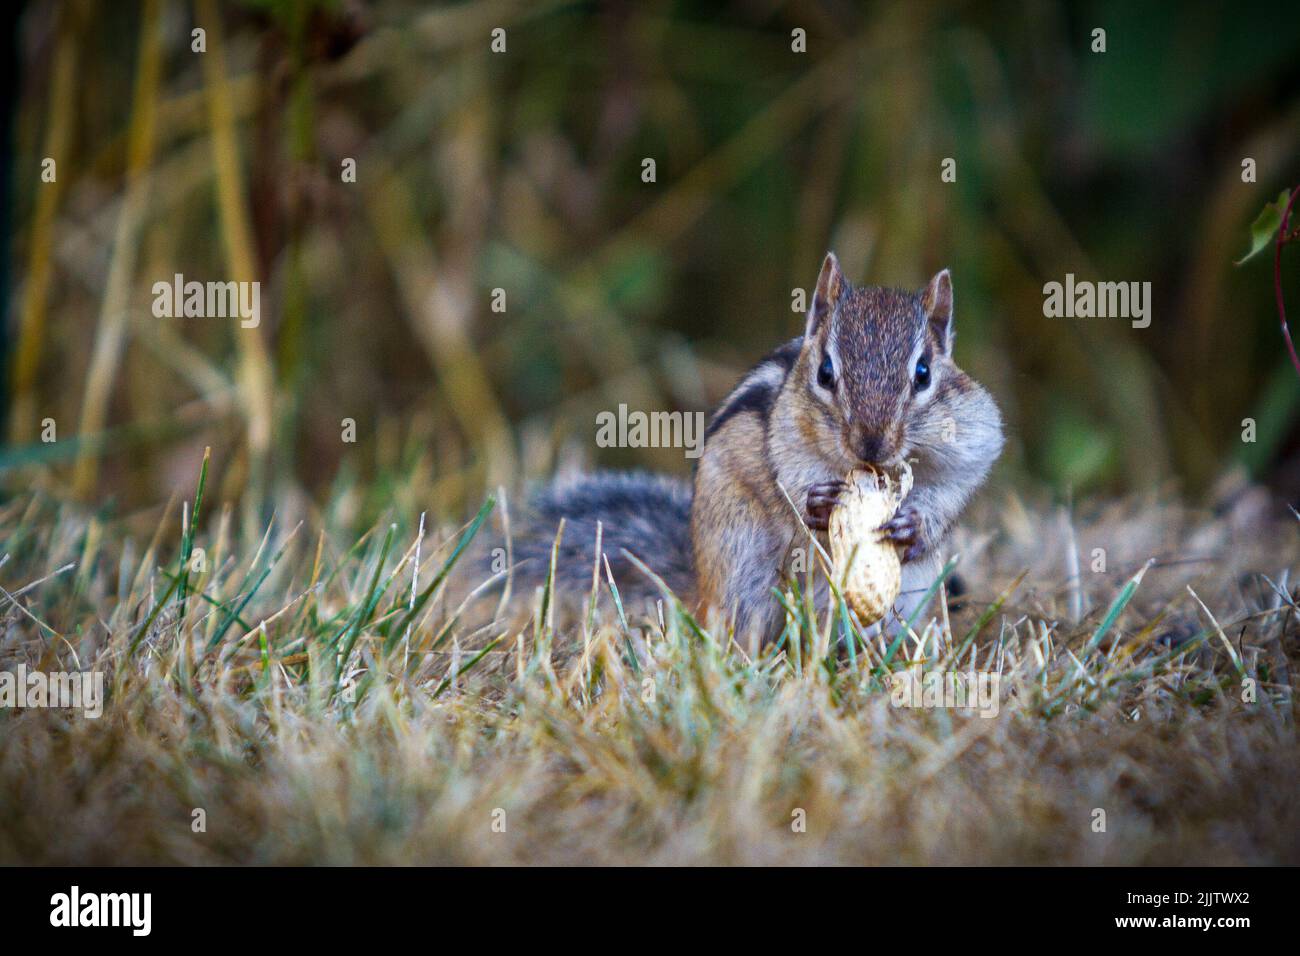 A Asian chipmunk -squirrel eating a peanut on the ground on a blurry background Stock Photo